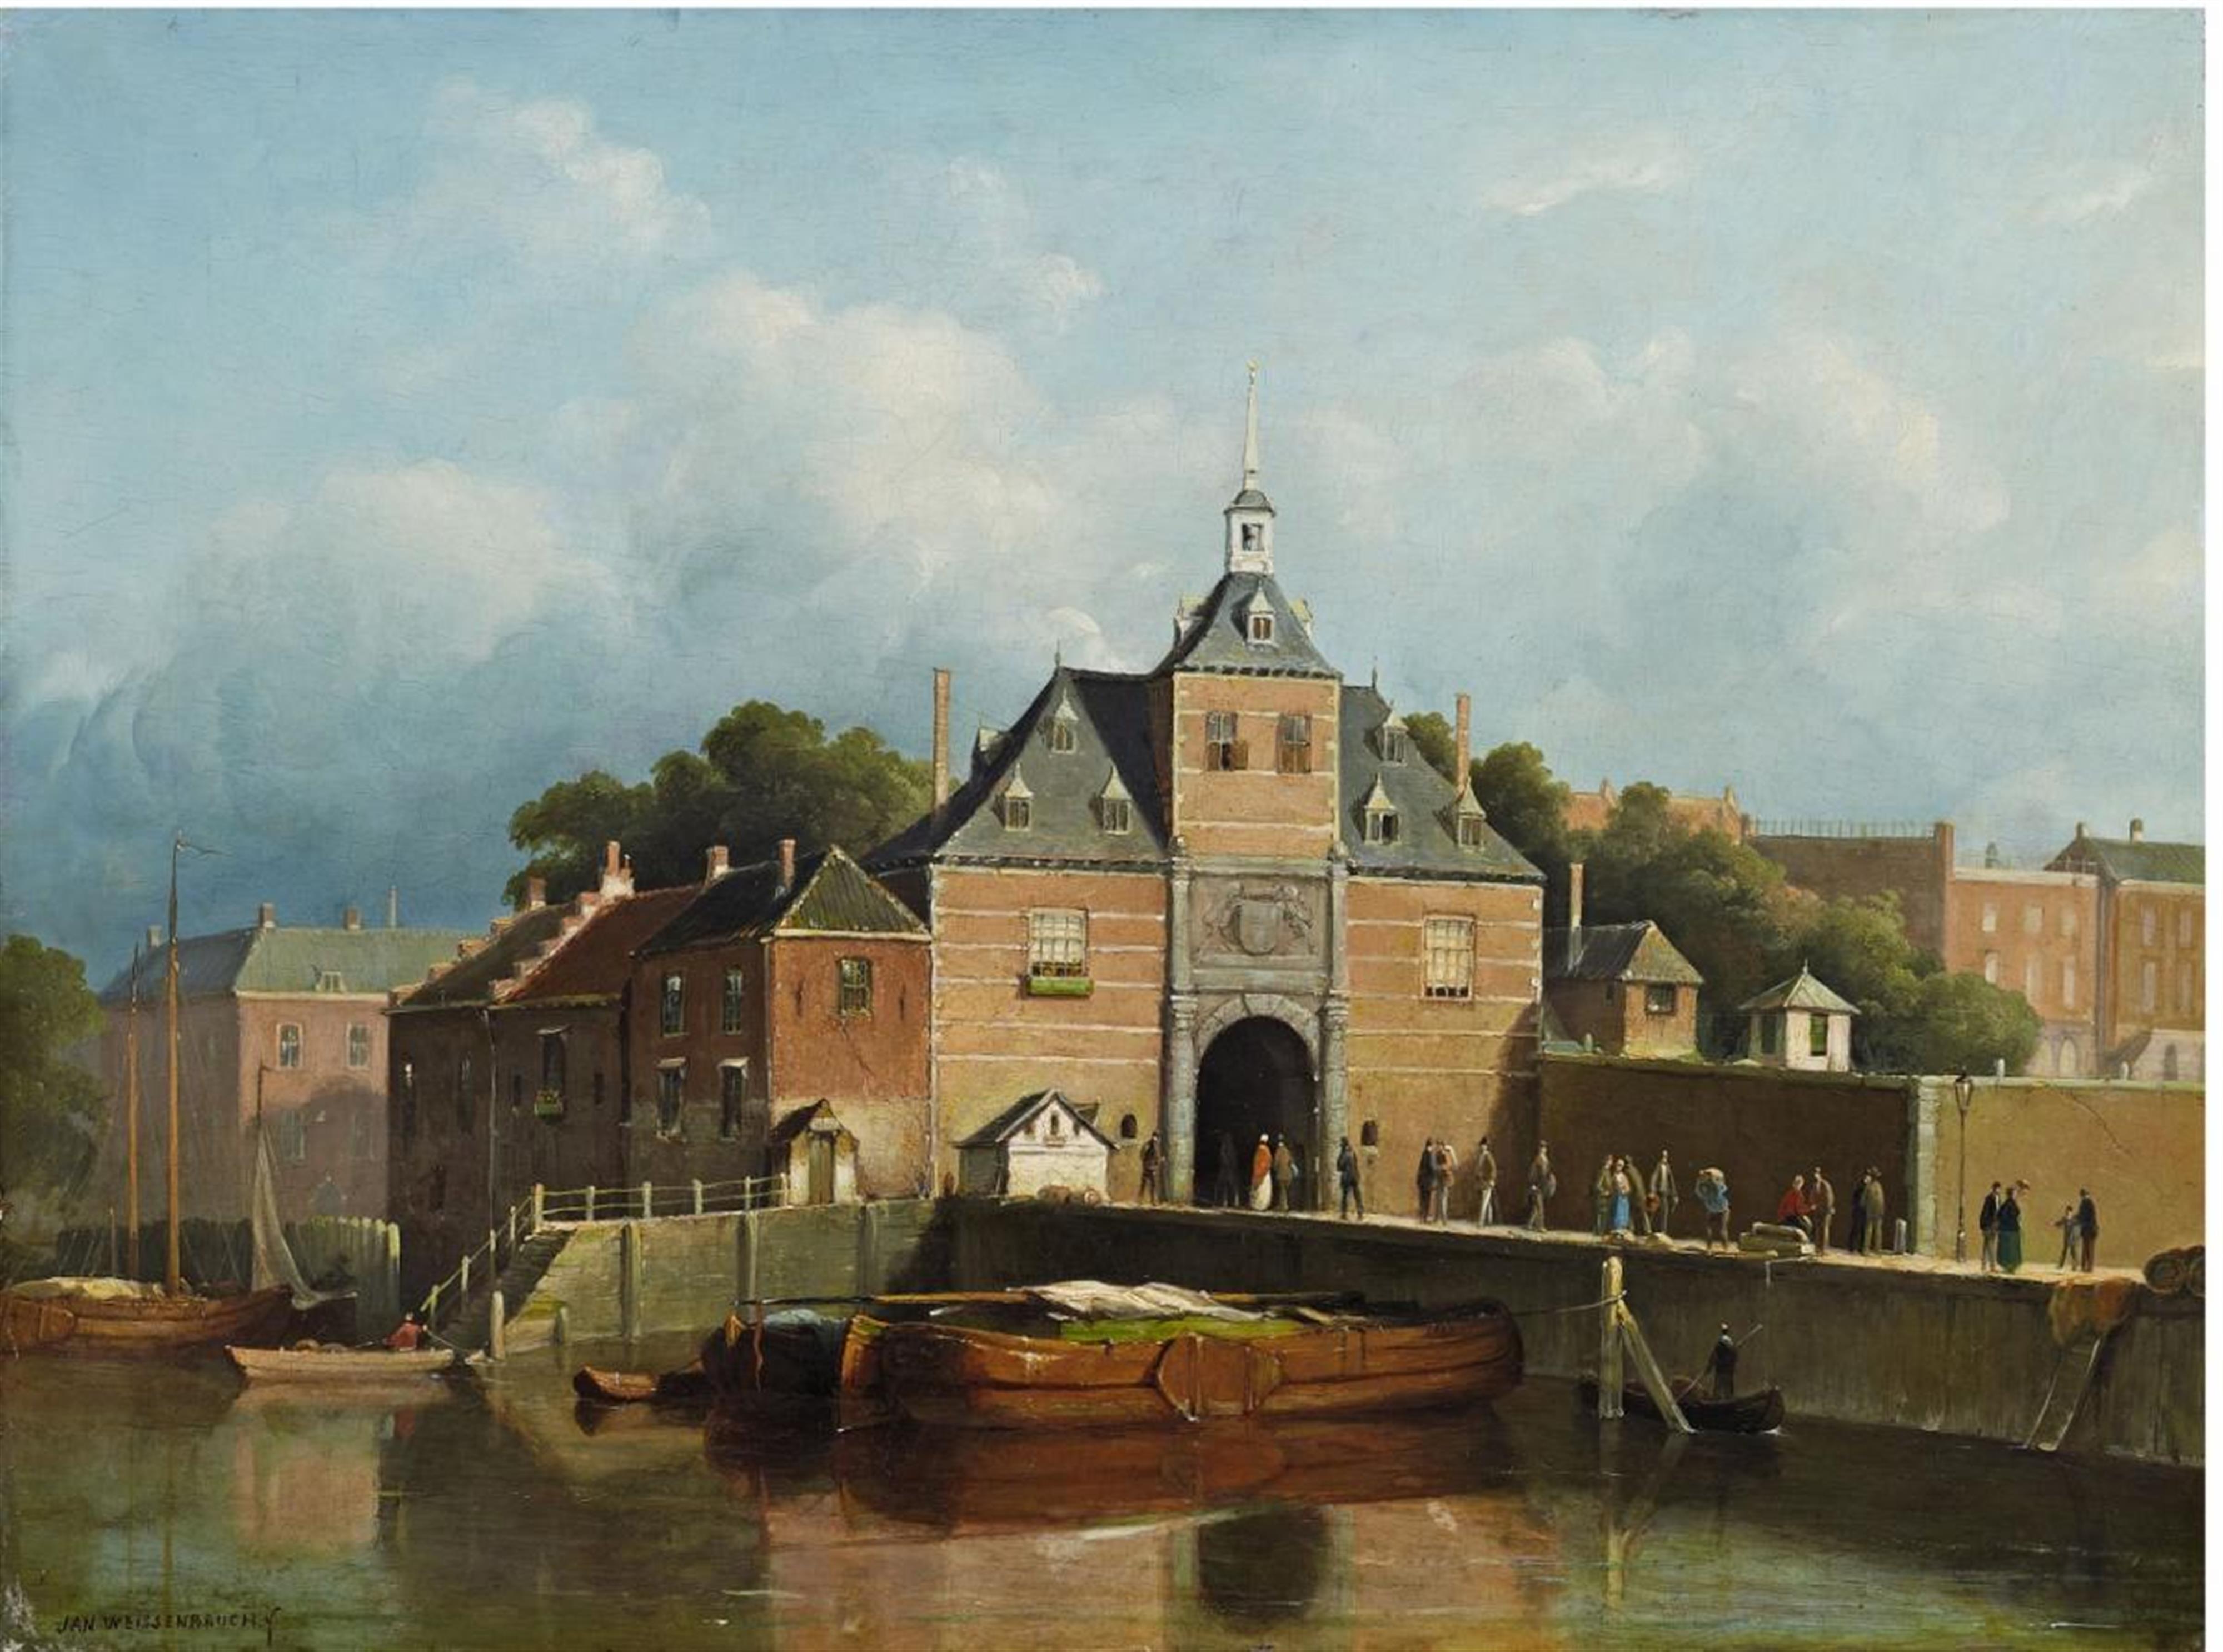 Jan Weissenbruch - A VIEW OF A CITY GATE - image-1